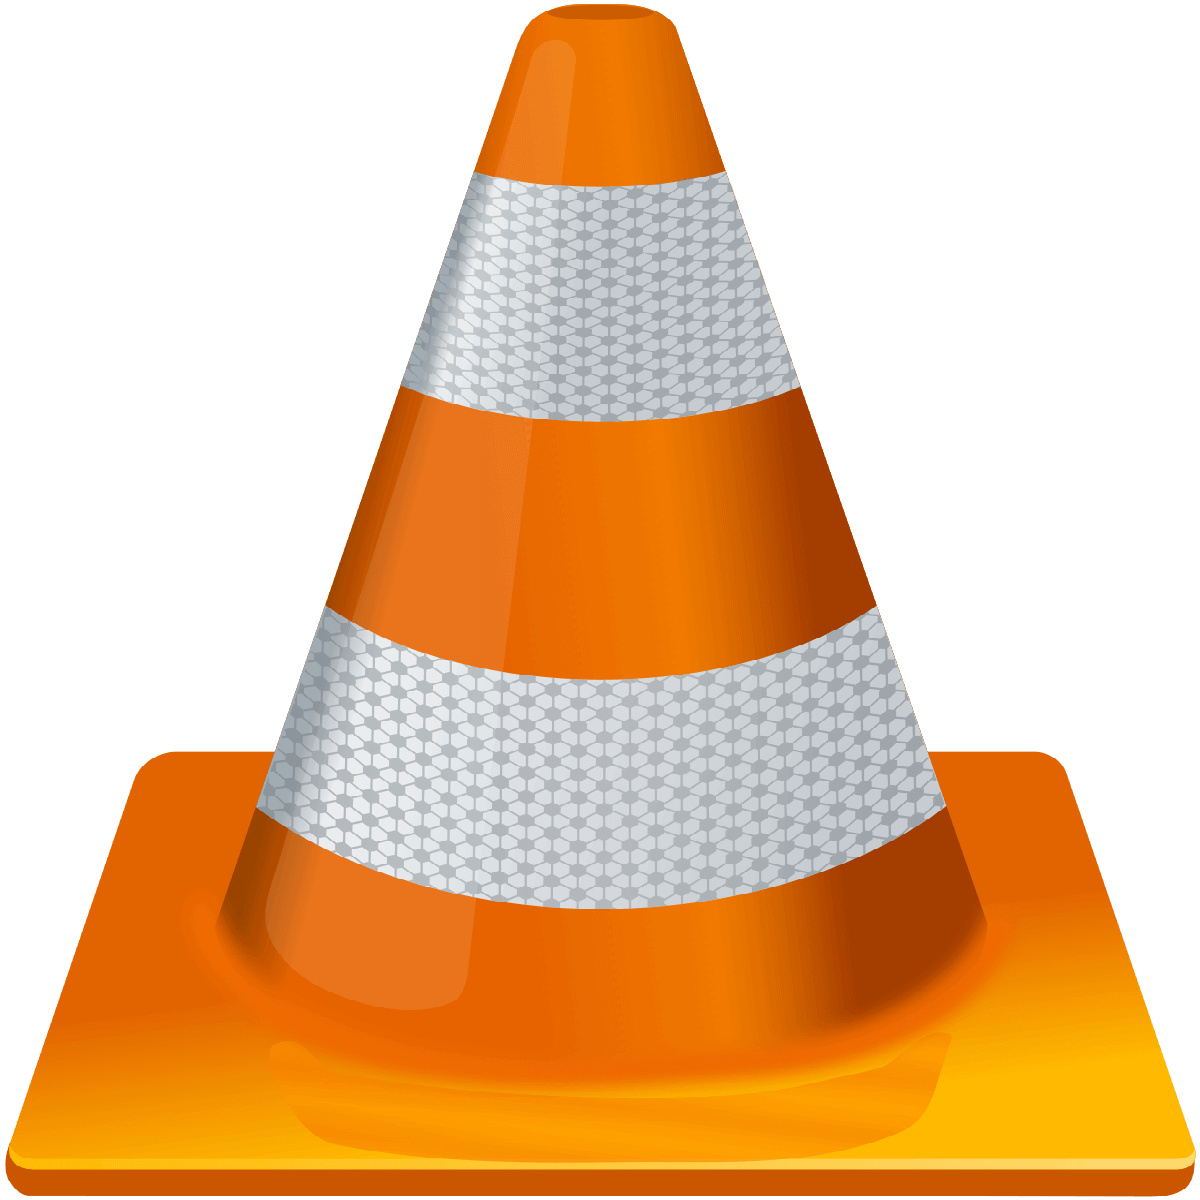 vlc media player for windows 10